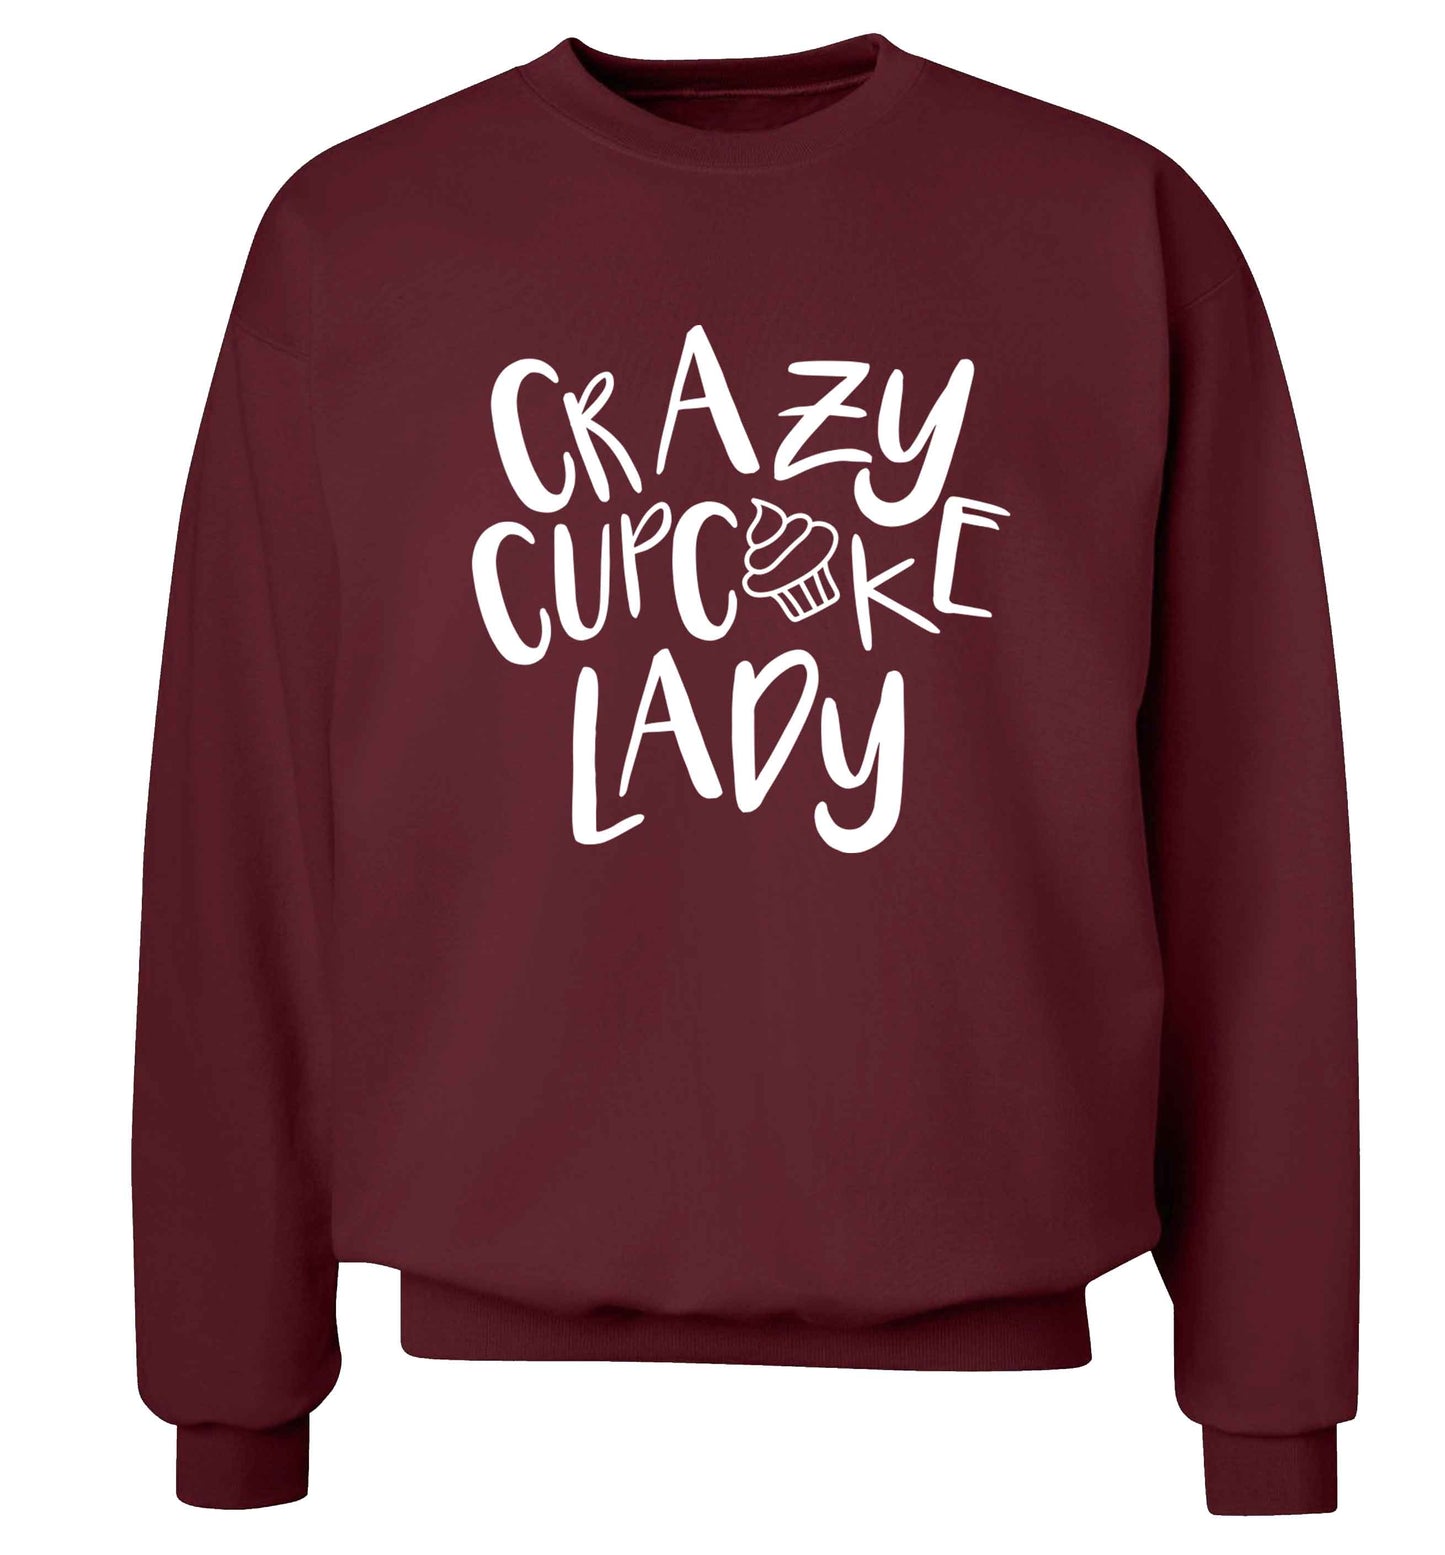 Crazy cupcake lady Adult's unisex maroon Sweater 2XL